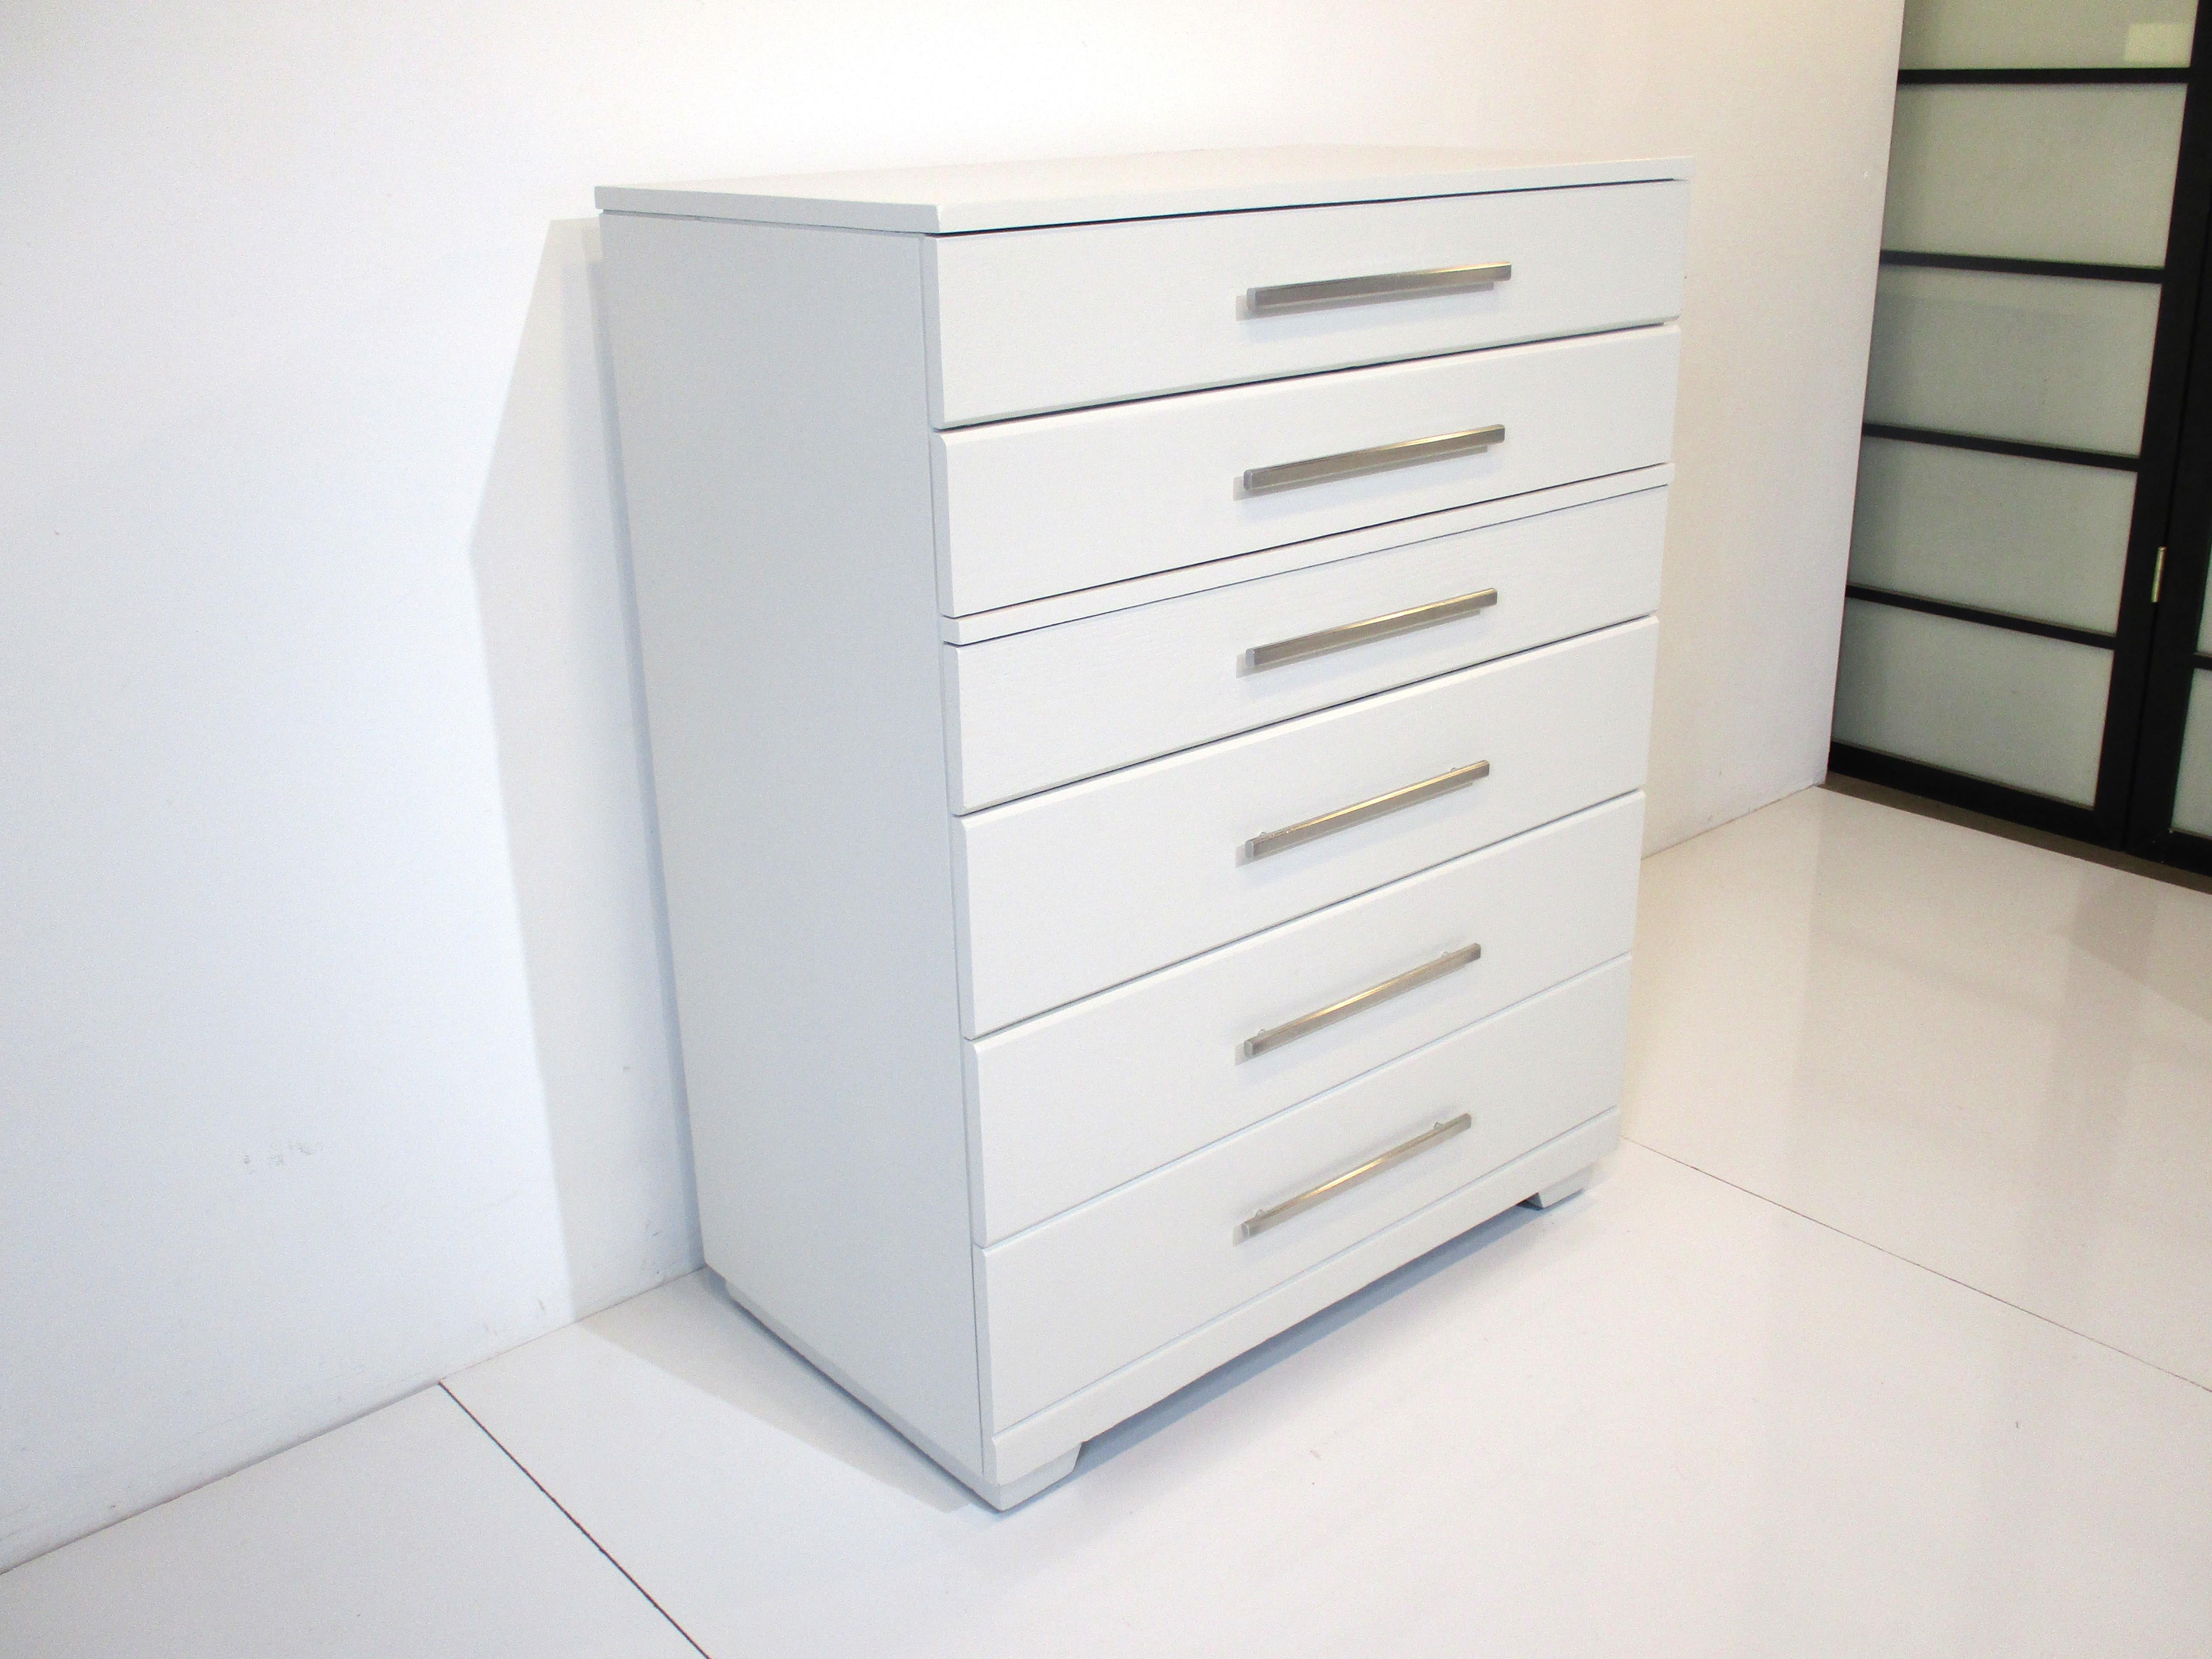 A chalk white very well constructed six drawer tall dresser chest with long thin aluminum pulls. By the iconic designer Raymond Loewy who touched most of American life with designs for appliances, trains, automobiles like the Studebaker Avanti,